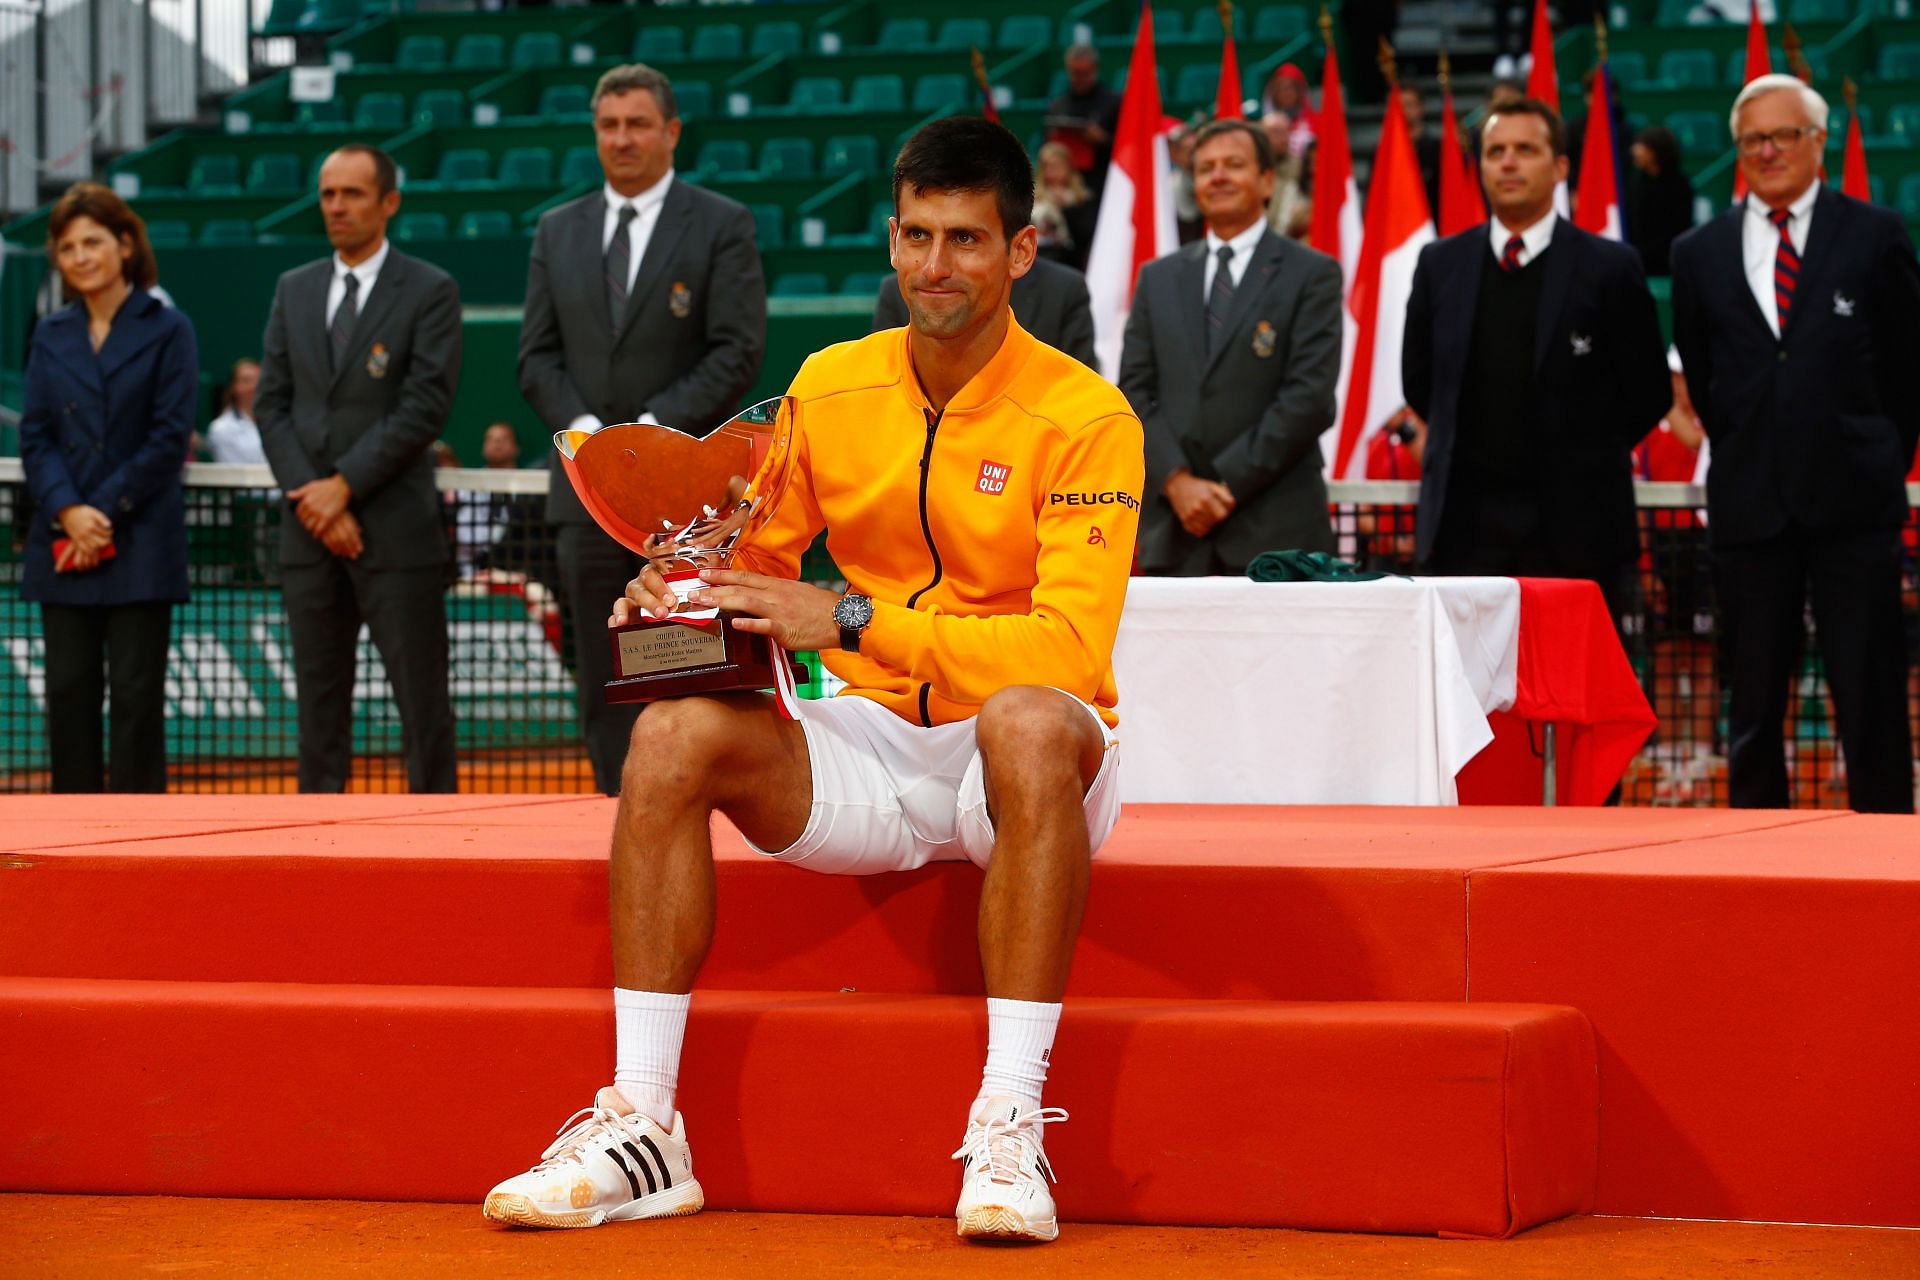 Novak Djokovic with the trophy during the 2015 edition of the event